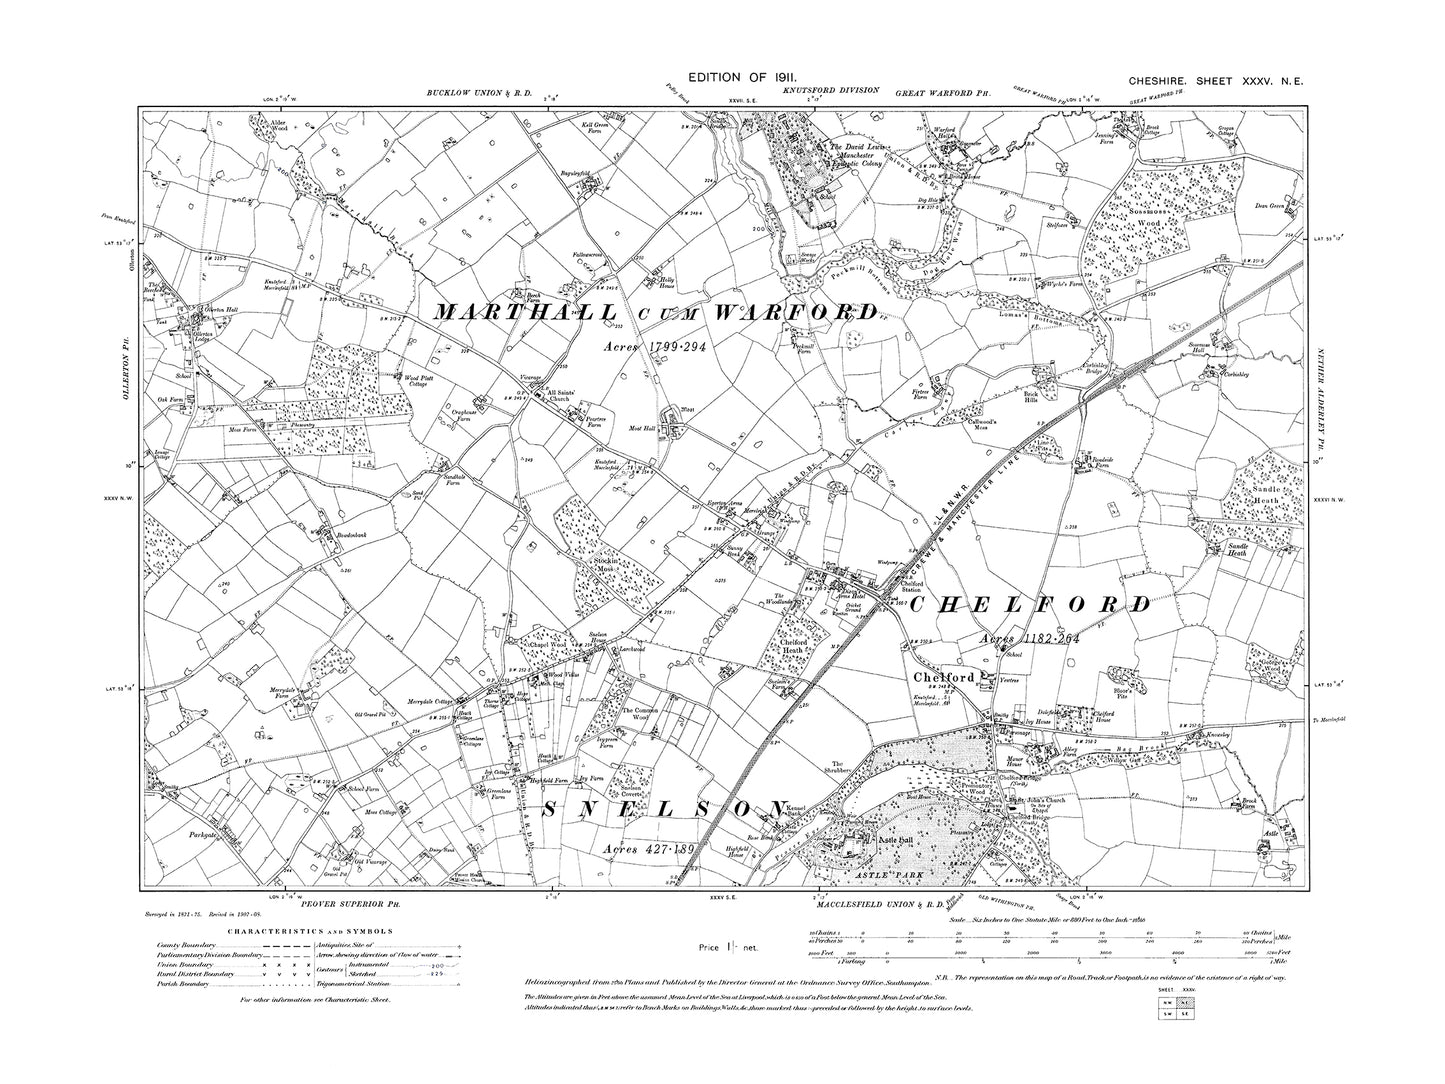 Old OS map dated 1911, showing Chelford, Snelson, Ollerton (east) in Cheshire 35NE